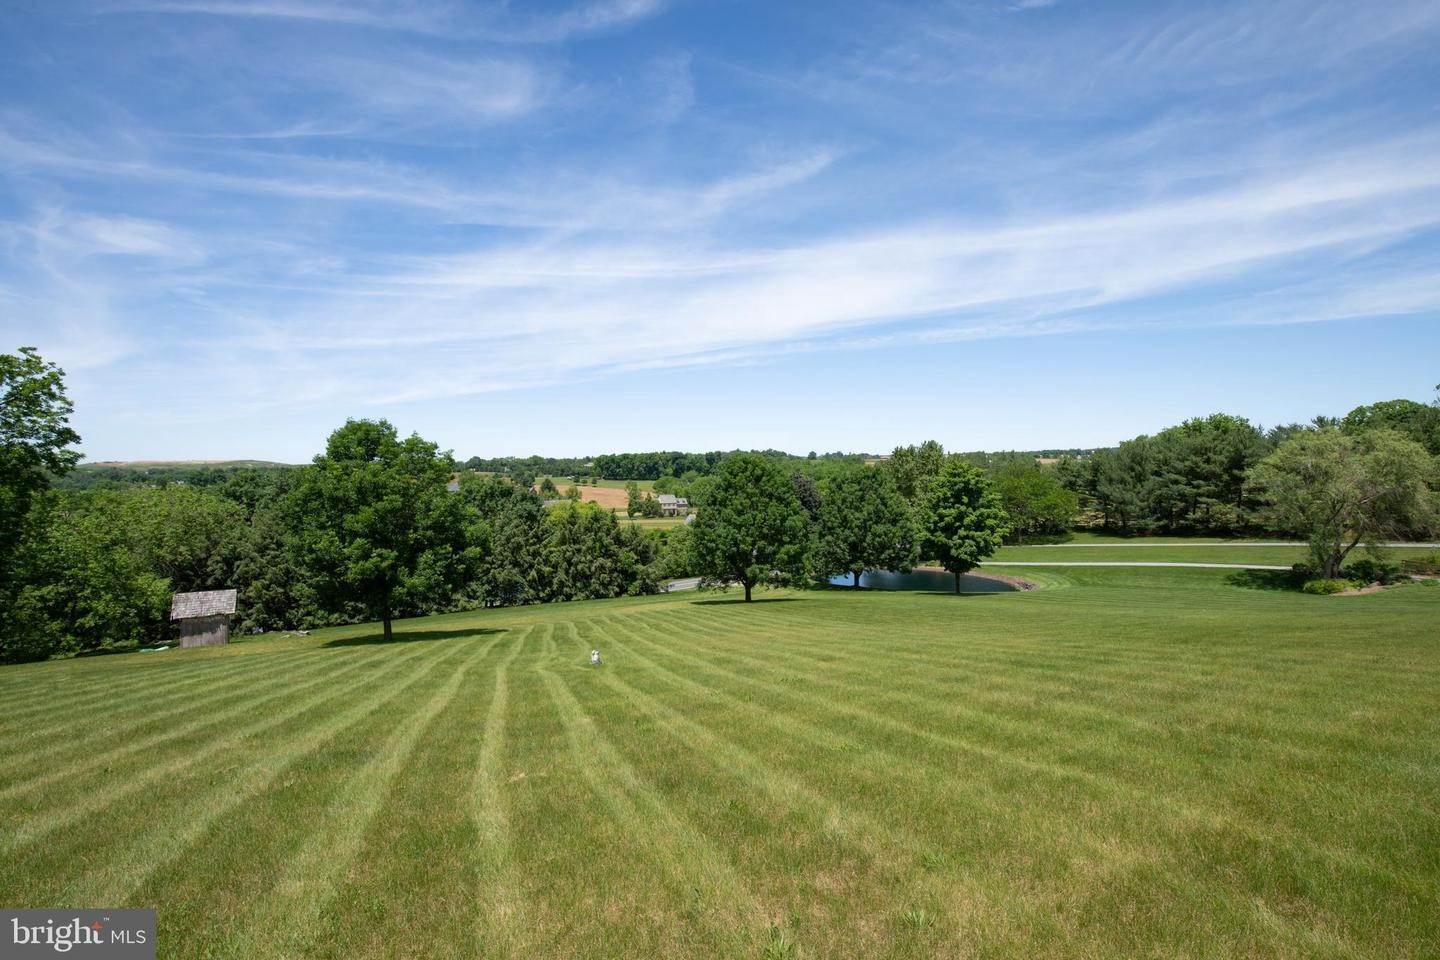 17. Land for Sale at 3511 MEADOW VIEW Road Manheim, Pennsylvania 17545 United States